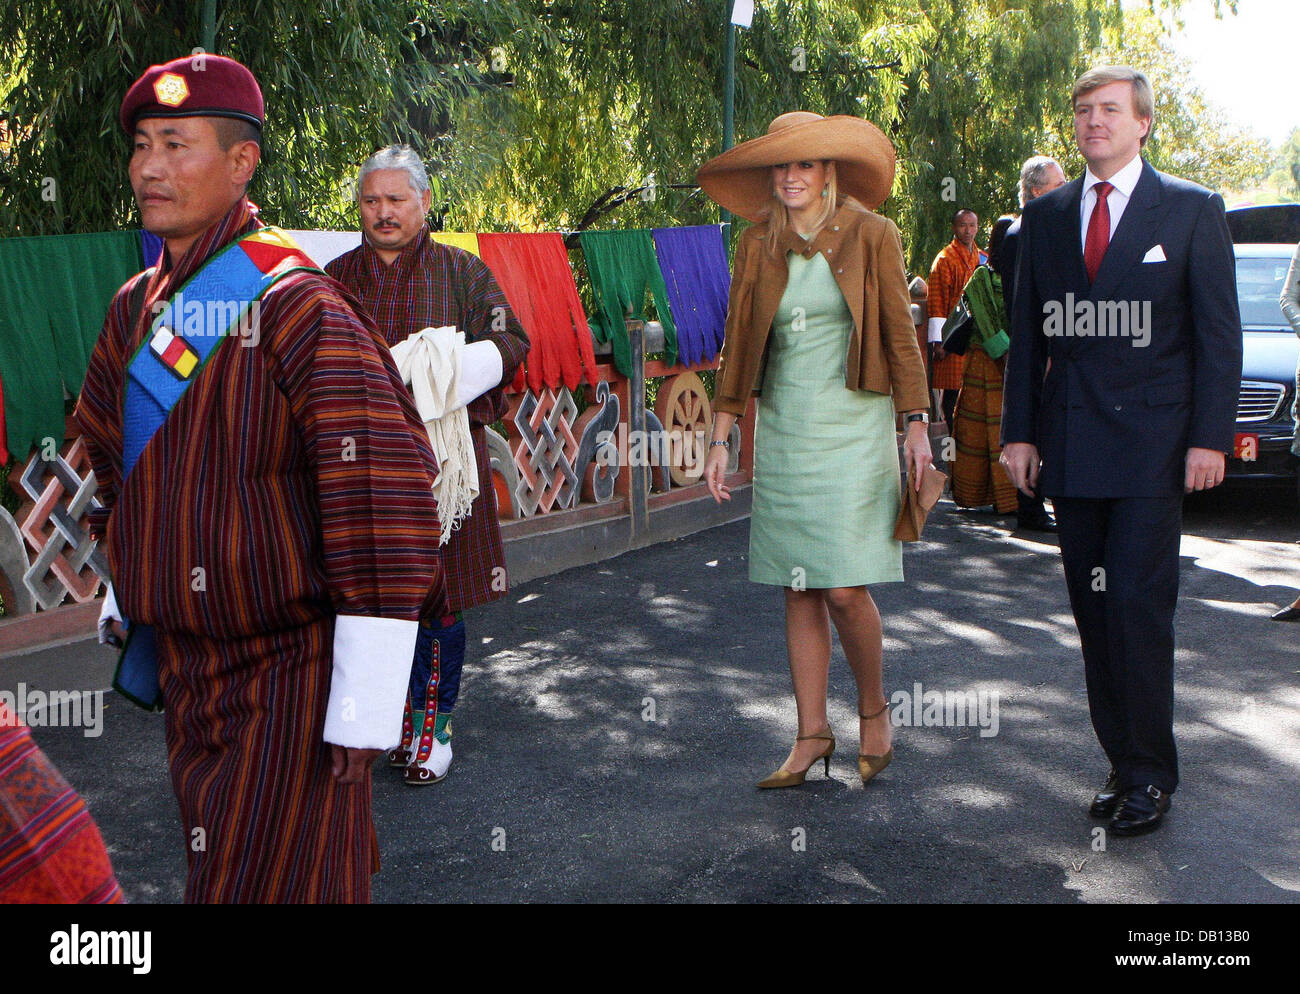 Crown Prince Willem-Alexander of the Netherlands (R) and Princess Maxima of the Netherlands (2-R) visit the Royal Palace of Paro, Bhutan, 28 October 2007. The Dutch Crown Prince Couple is on an official visit to the Himalaya Mountains kingdom on invitation of King Jigme Khesar Namgyal Wangchuck of Bhutan. Photo: Albert Nieboer (NETHERLANDS OUT) Stock Photo